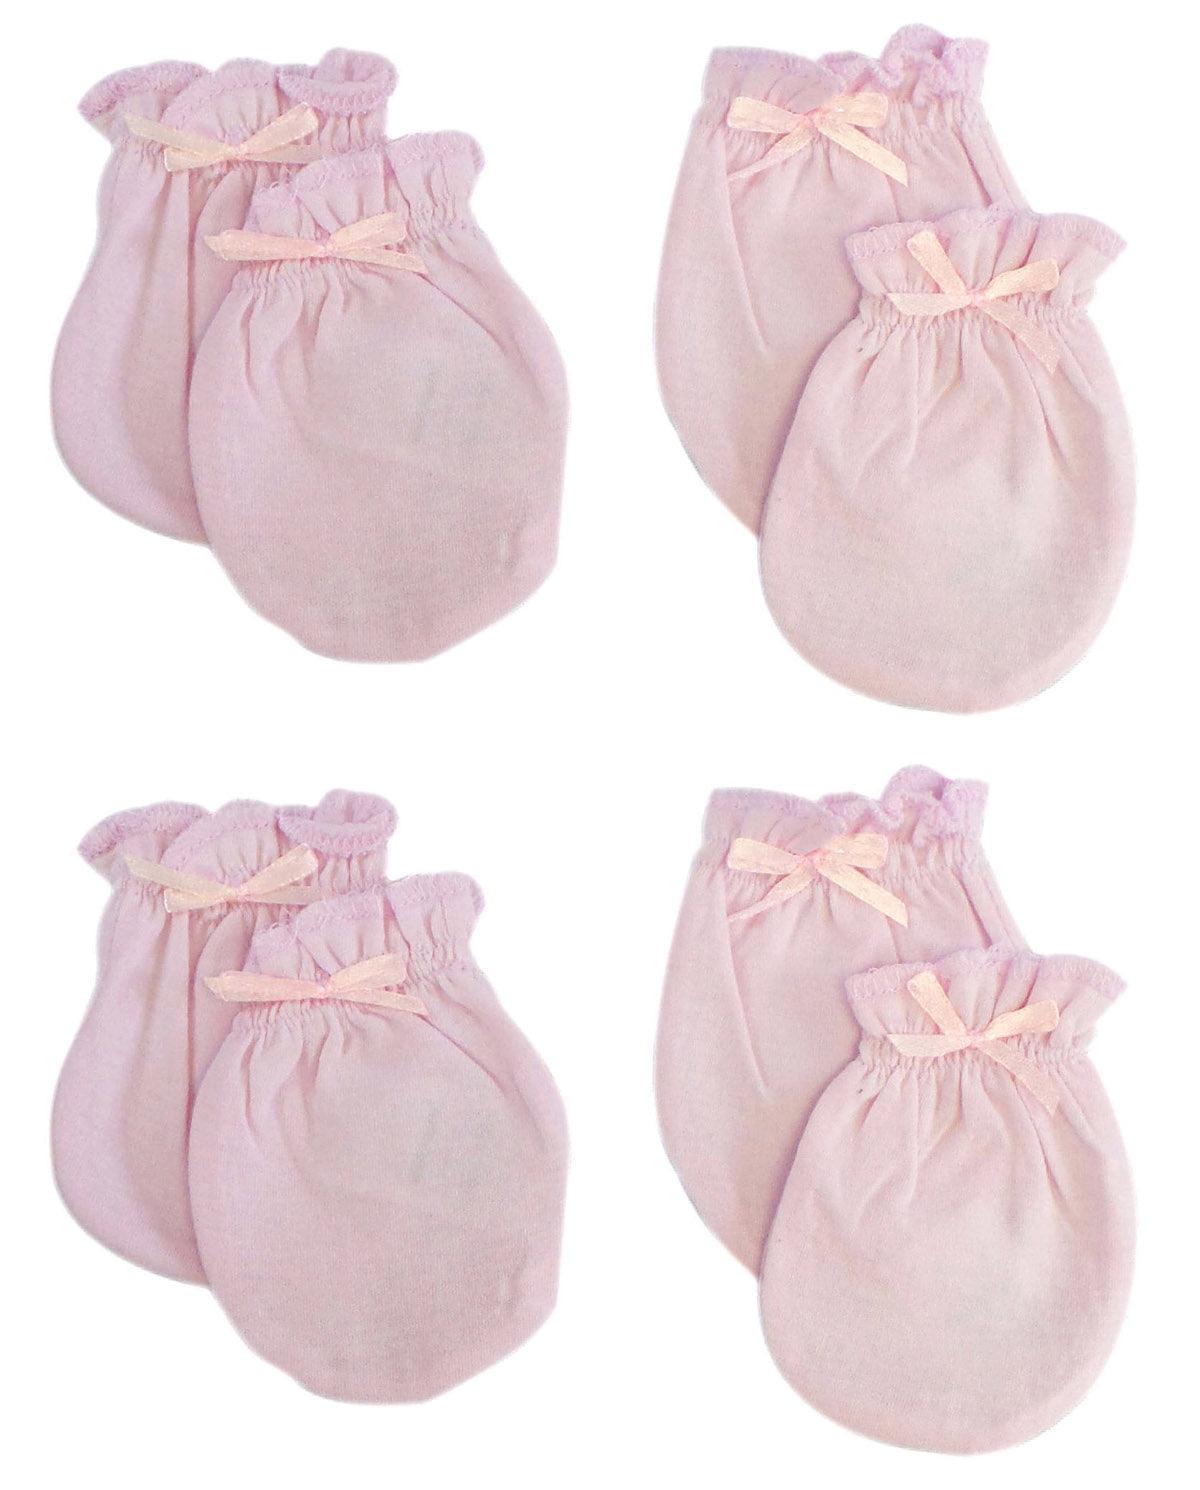 Infant Mittens (Pack of 4) 116-Pink-4-Pack - L & M Kee, LLC